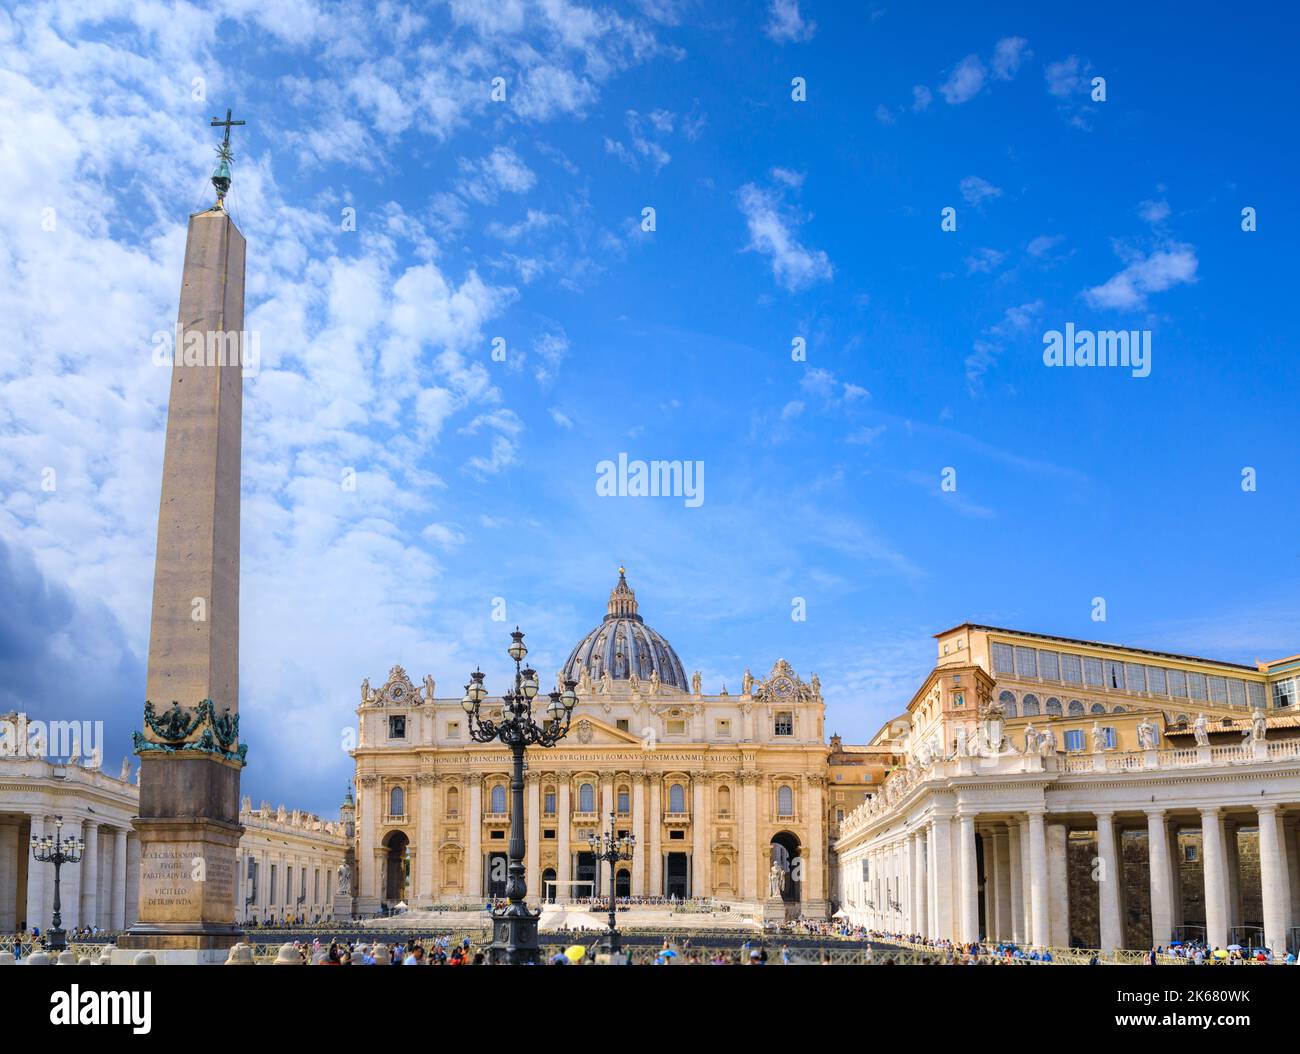 Square of Saint Peter's Basilica in Rome, Italy. Stock Photo